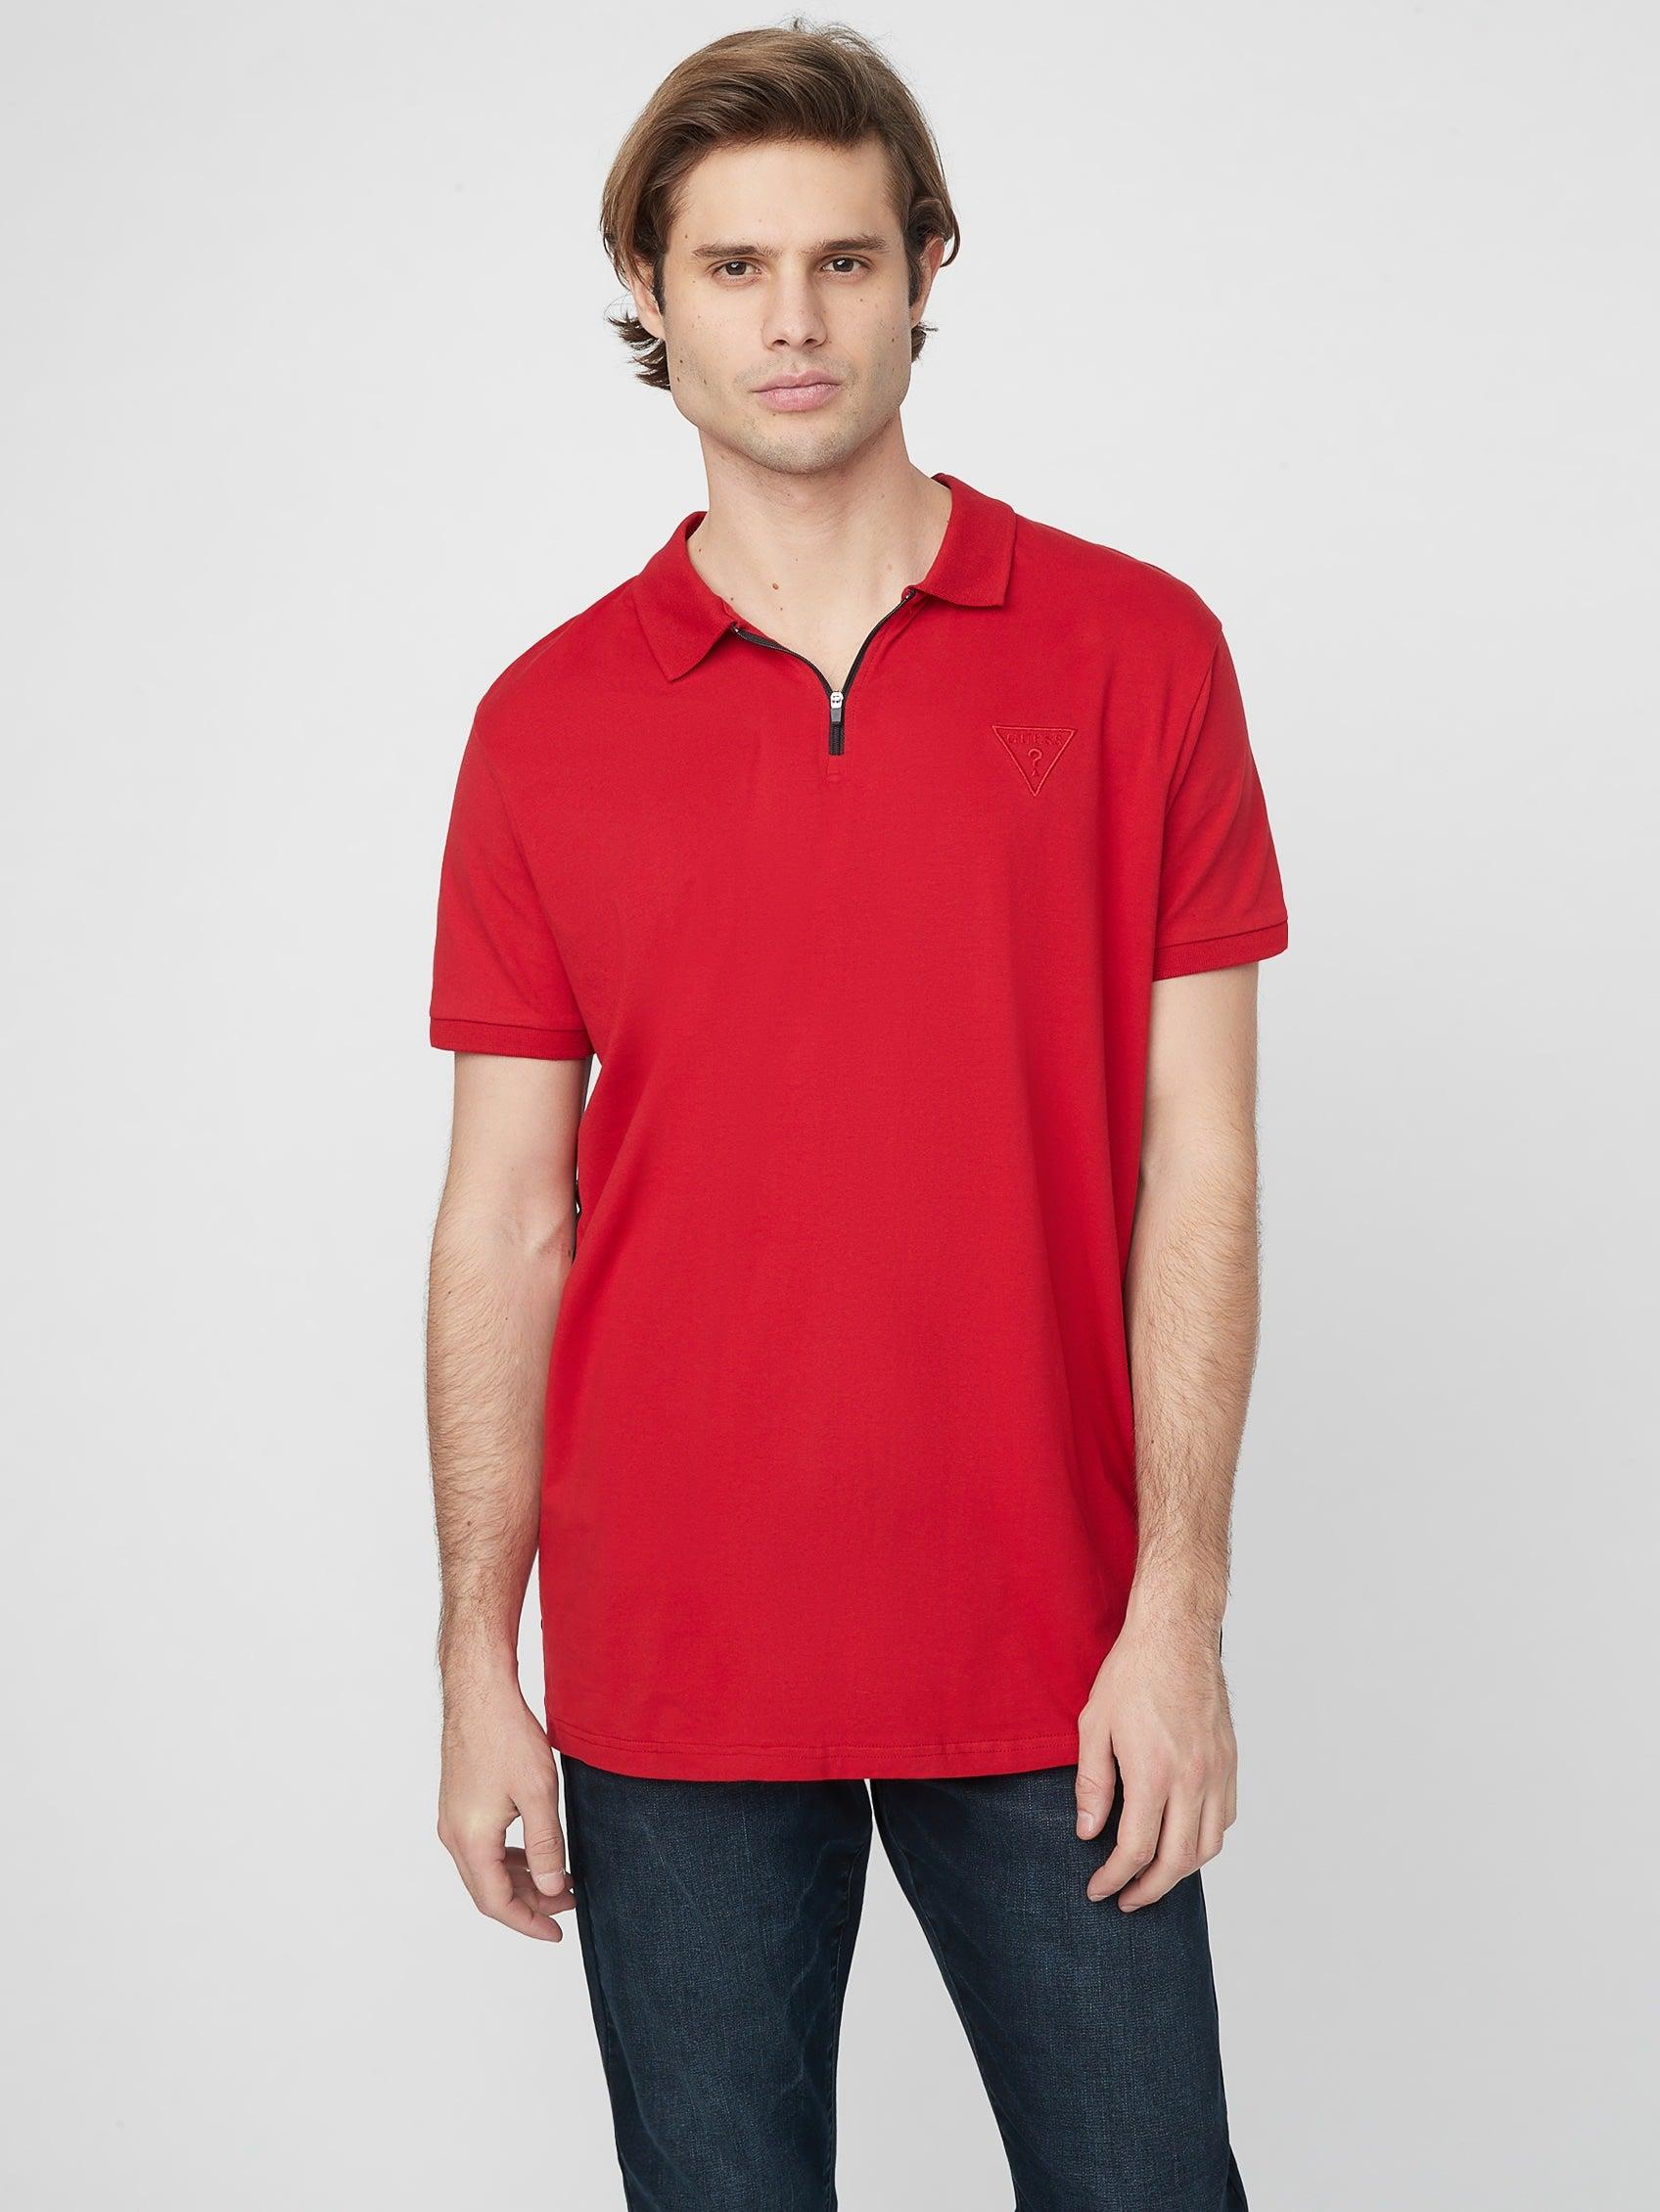 Guess Factory Teodoro Johnny Zip Polo in Red for Men | Lyst